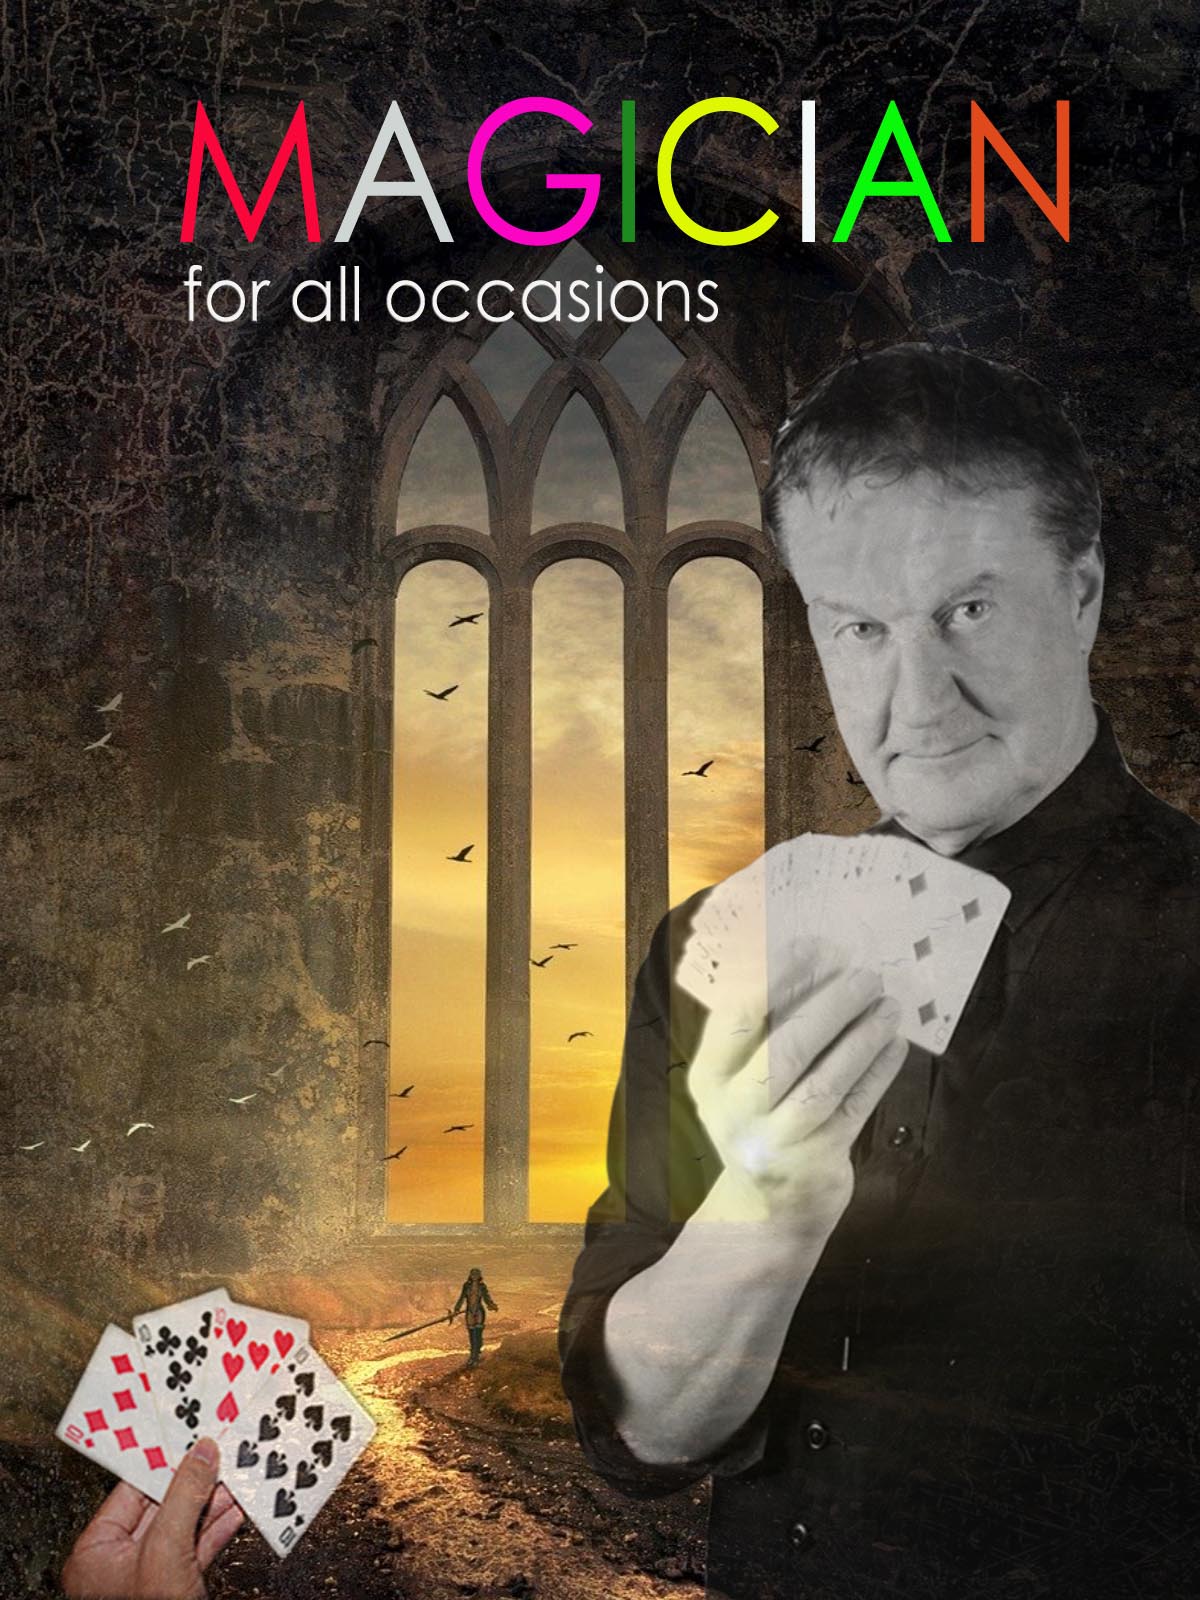 Magician for all occasions